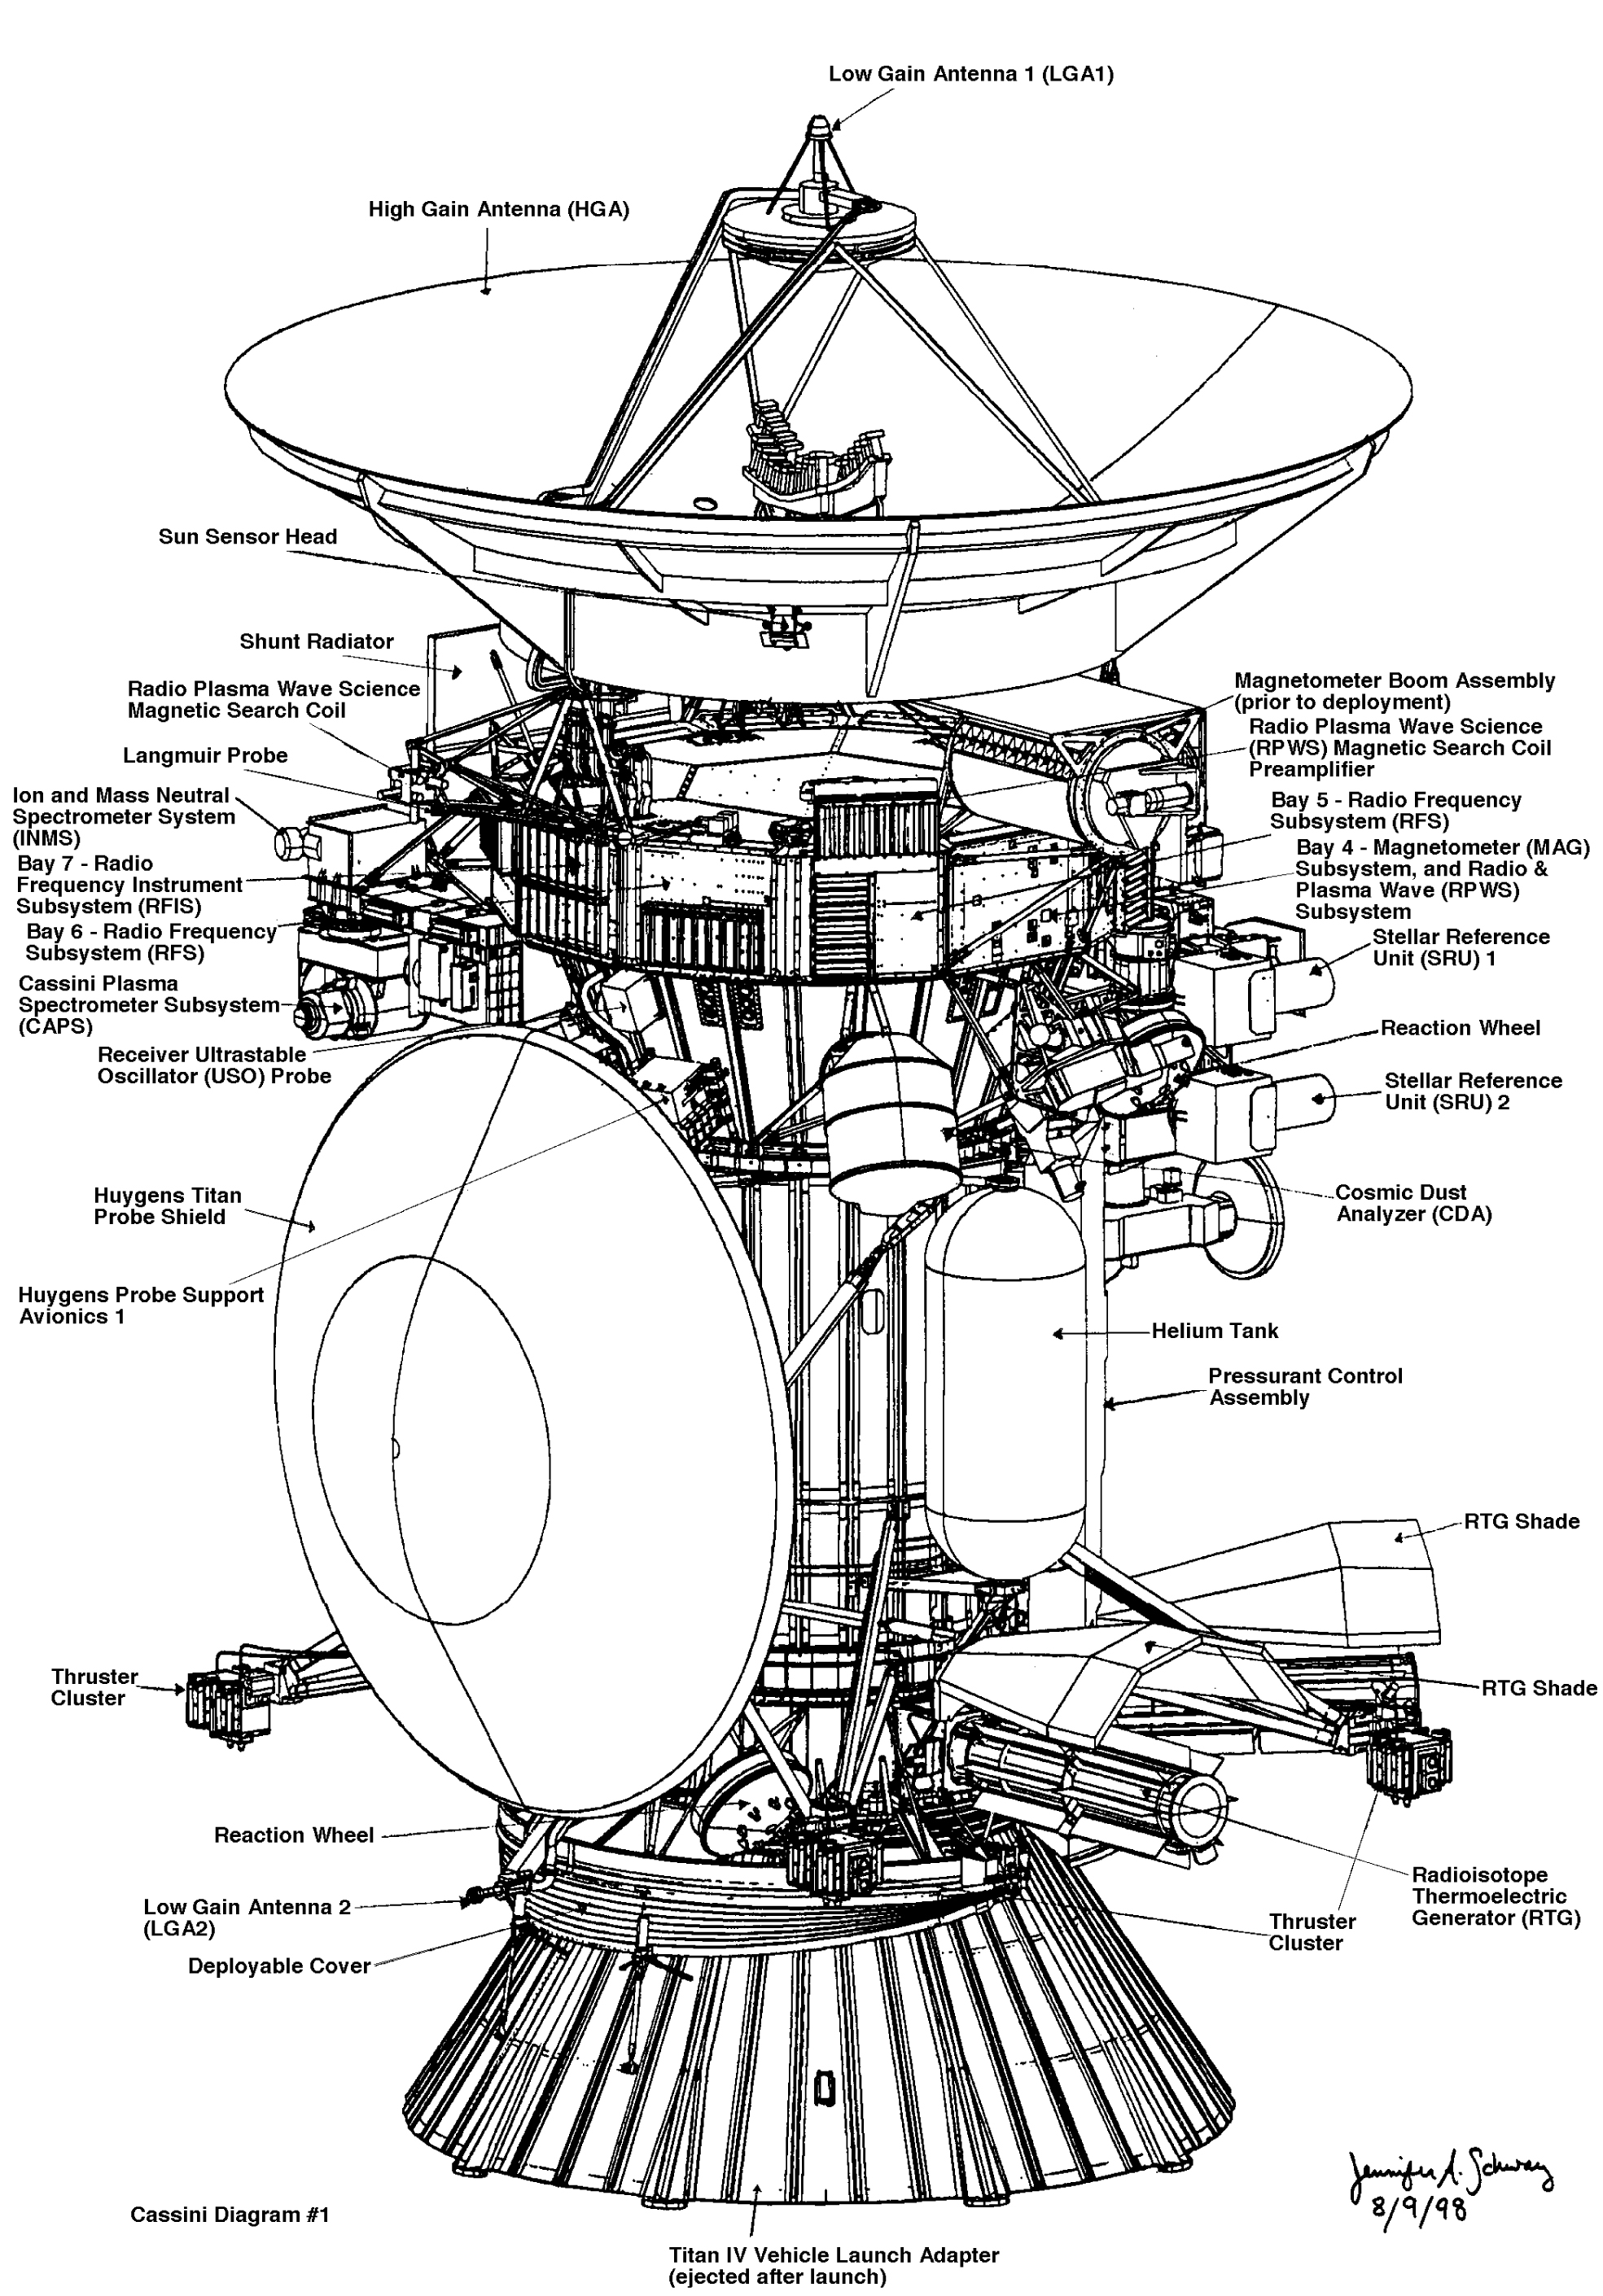 Diagram of the Cassini spacecraft and Huygens probe.